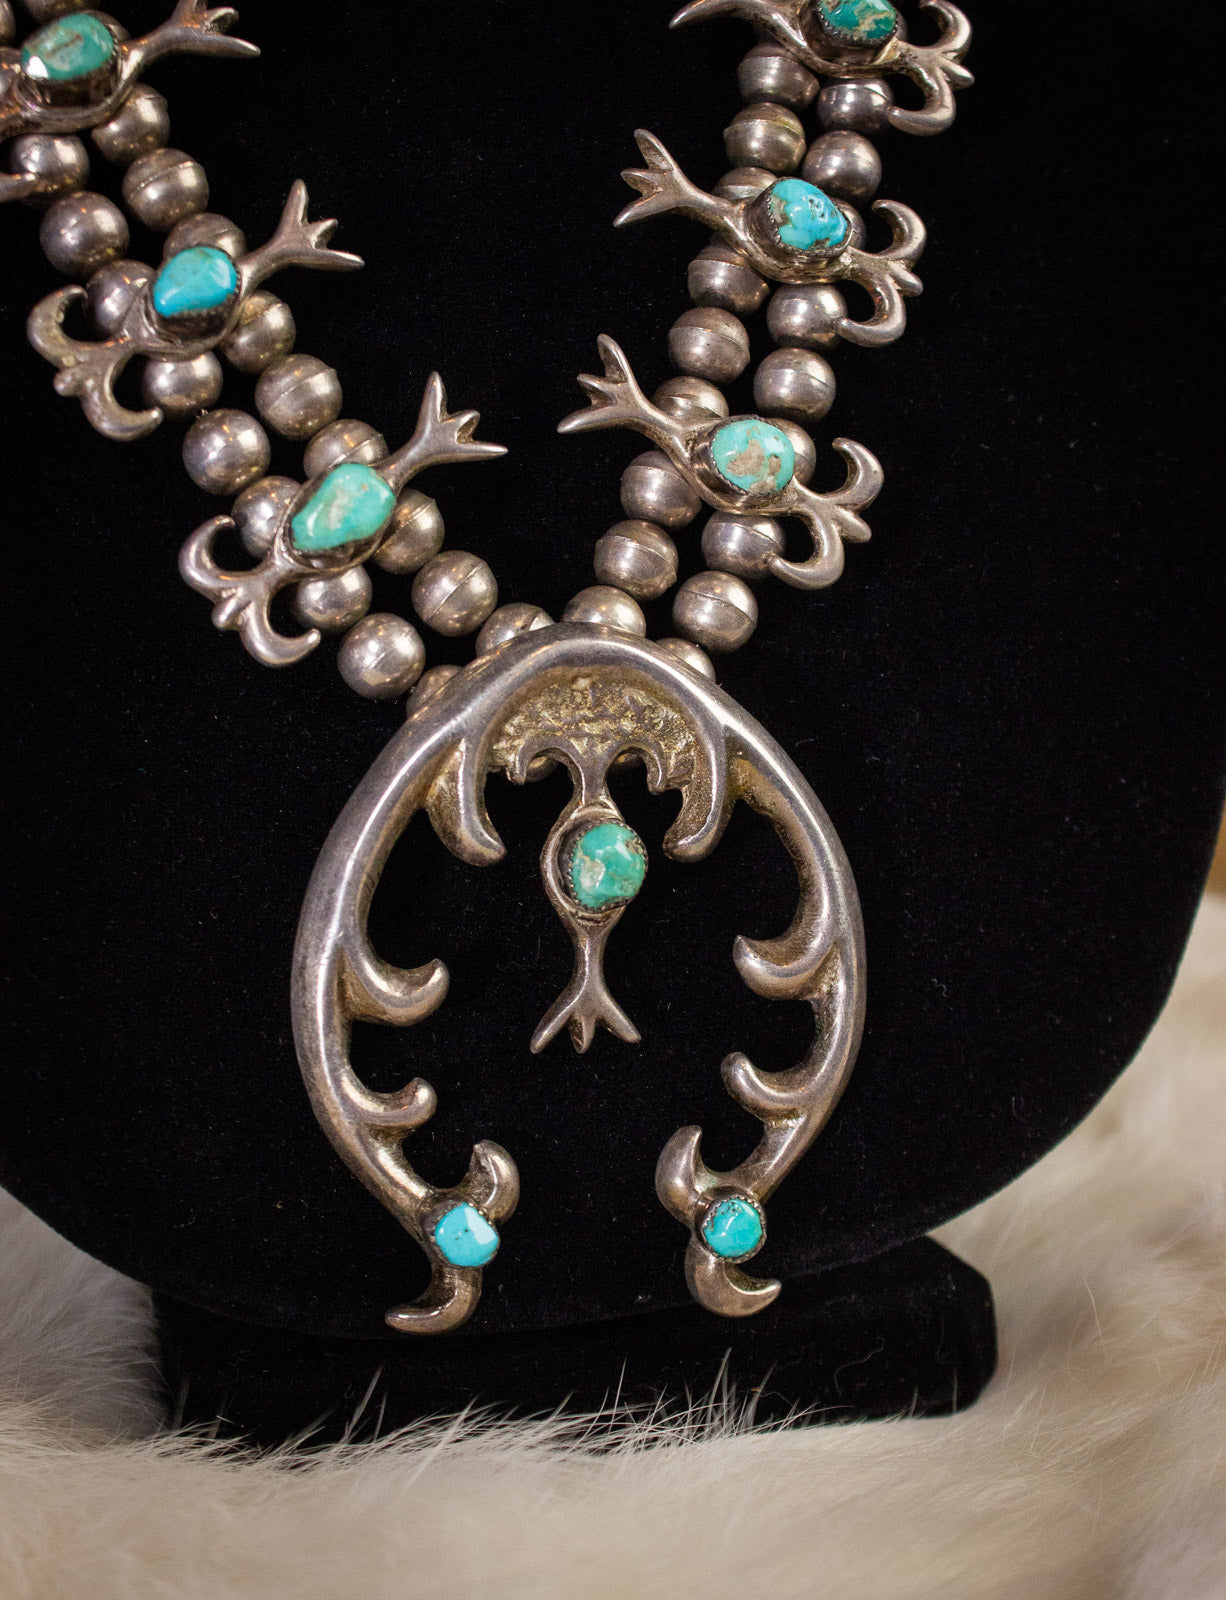 Vintage Turquoise Sterling Silver Double Bead Squash Blossom Necklace 60s